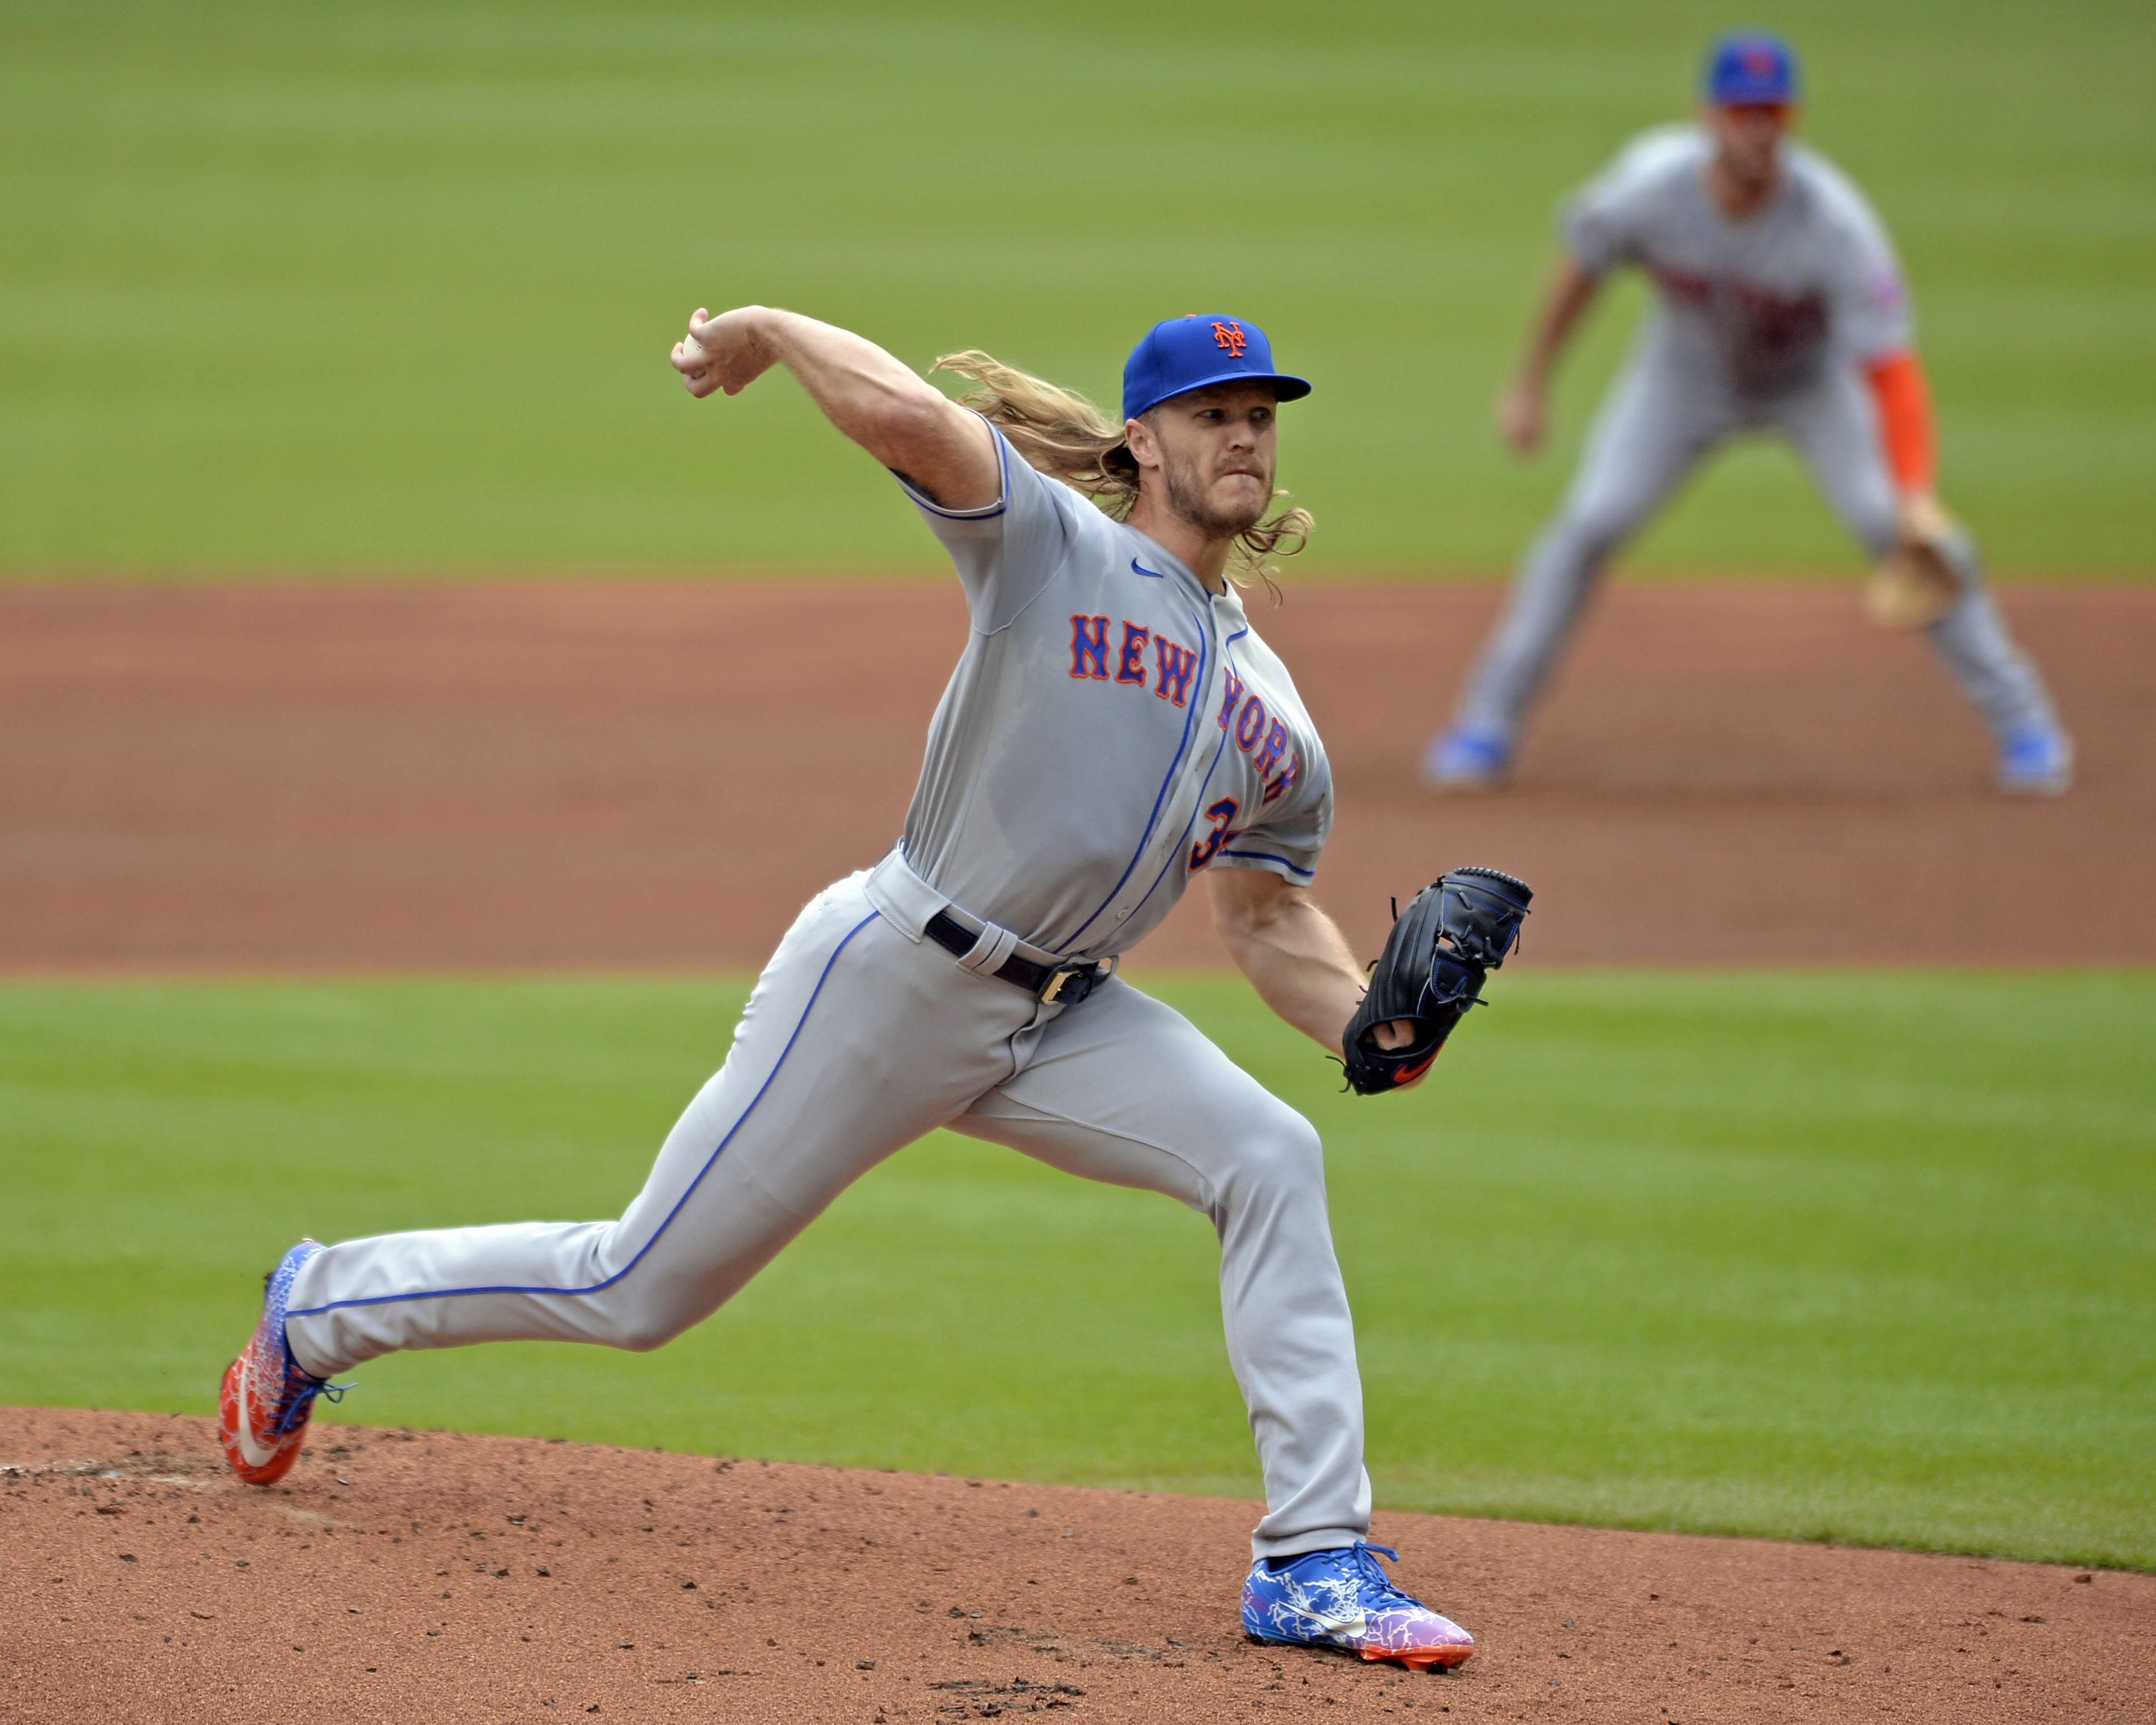 NY Mets News: It can't end like this for Noah Syndergaard